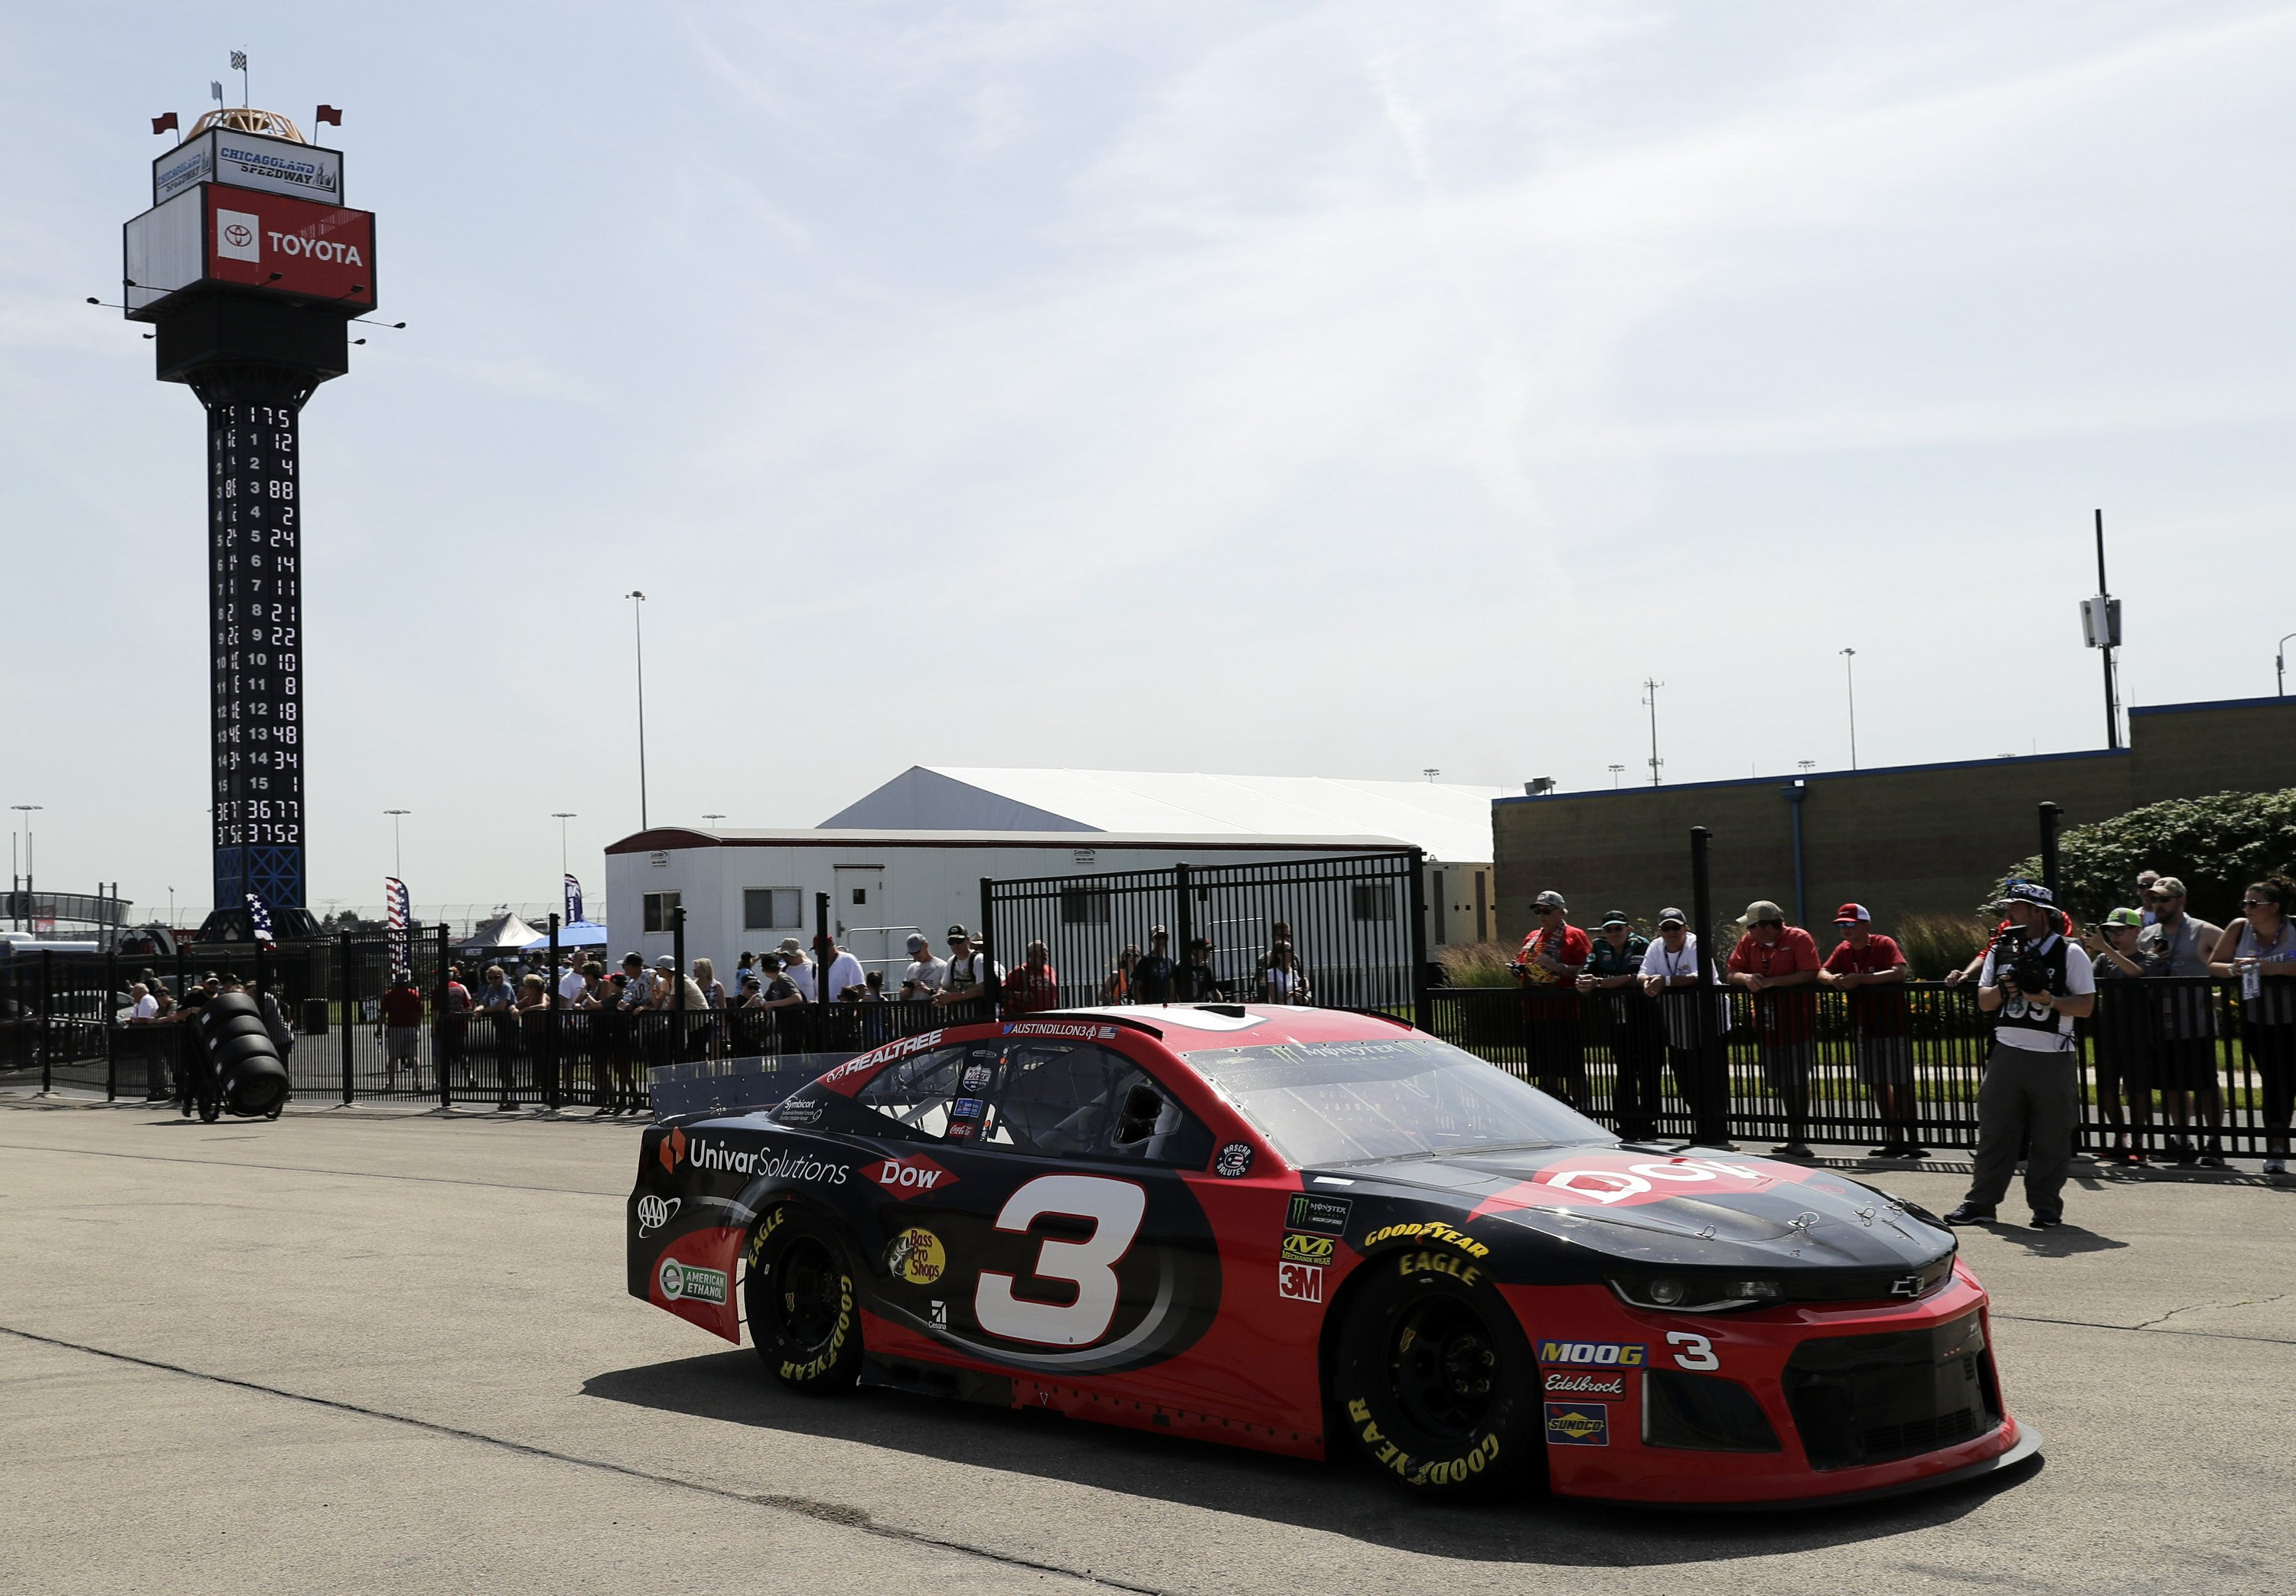 The Latest NASCAR Cup Series race at Chicagoland kicks off